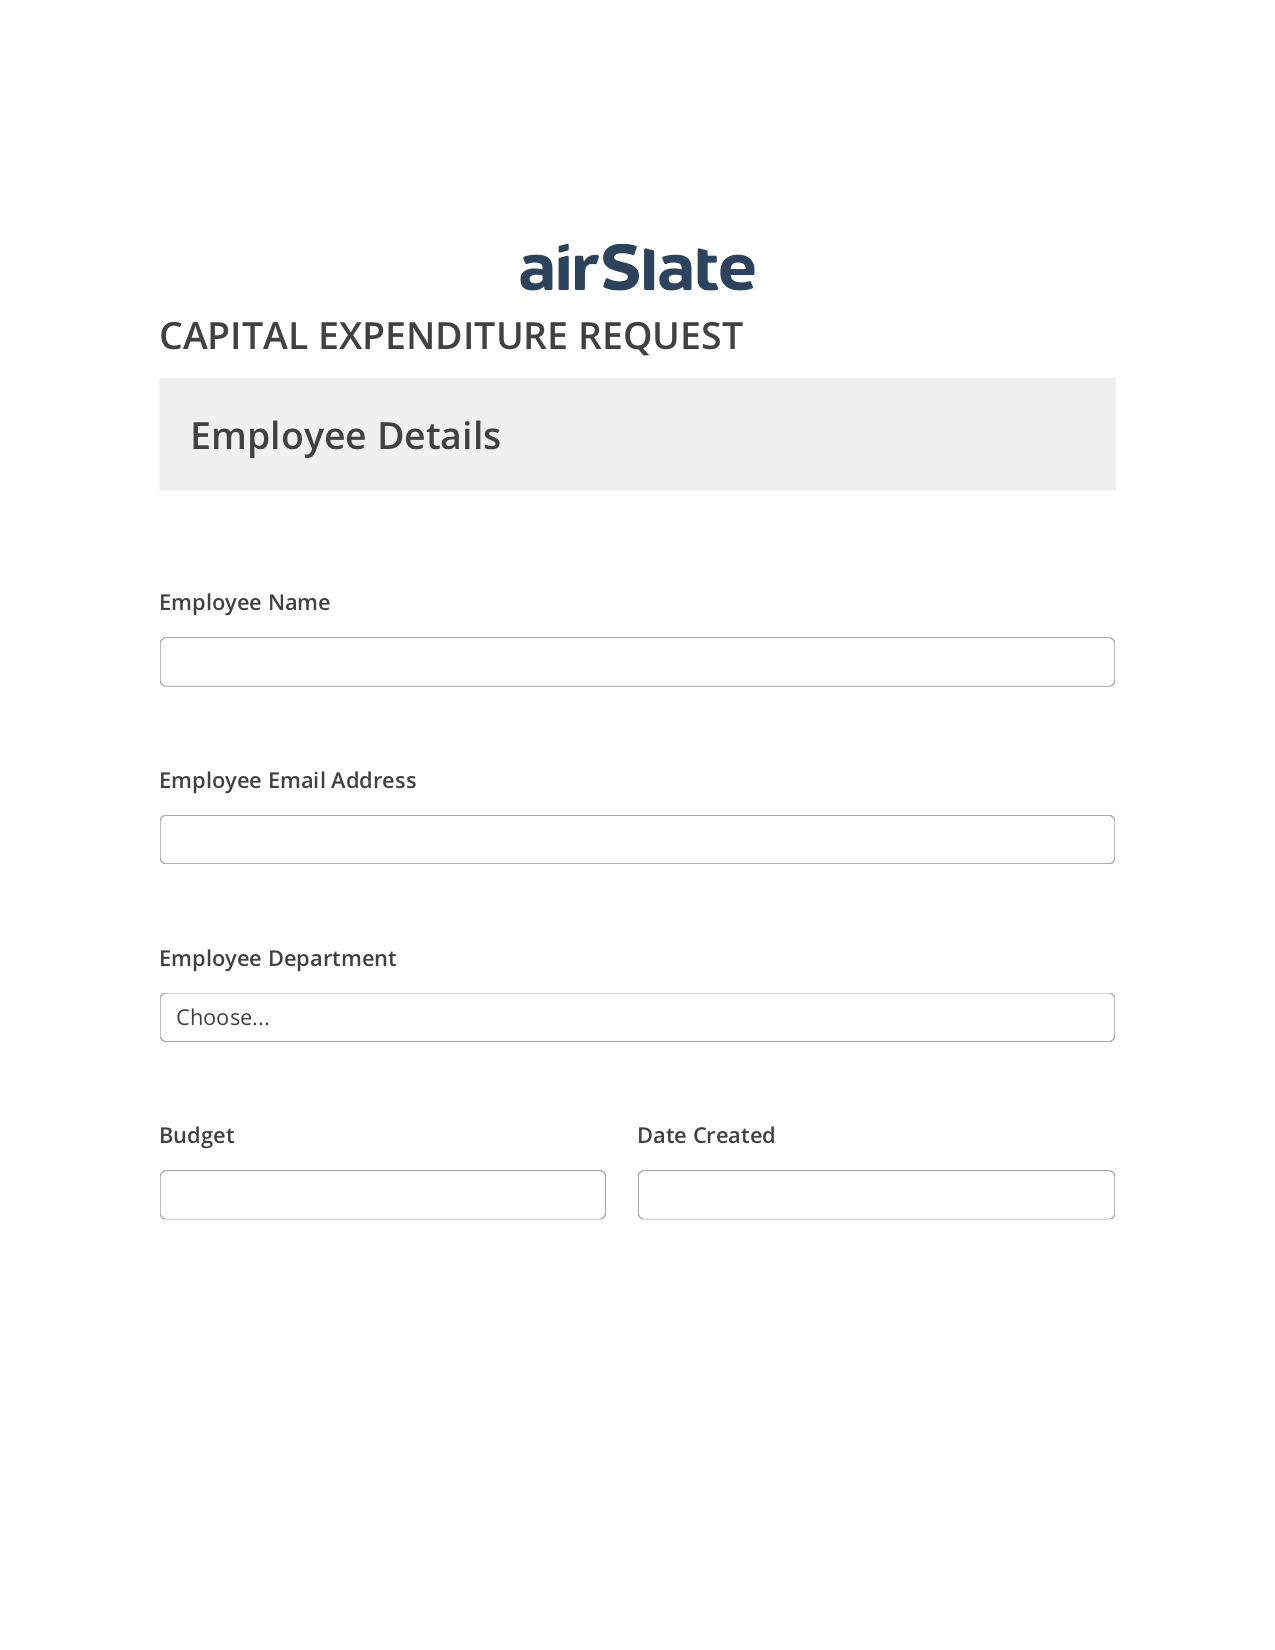 Multirole Capital Expenditure Request Approval Workflow Pre-fill from Google Sheet Dropdown Options Bot, SendGrid send Campaign bot, Slack Two-Way Binding Bot